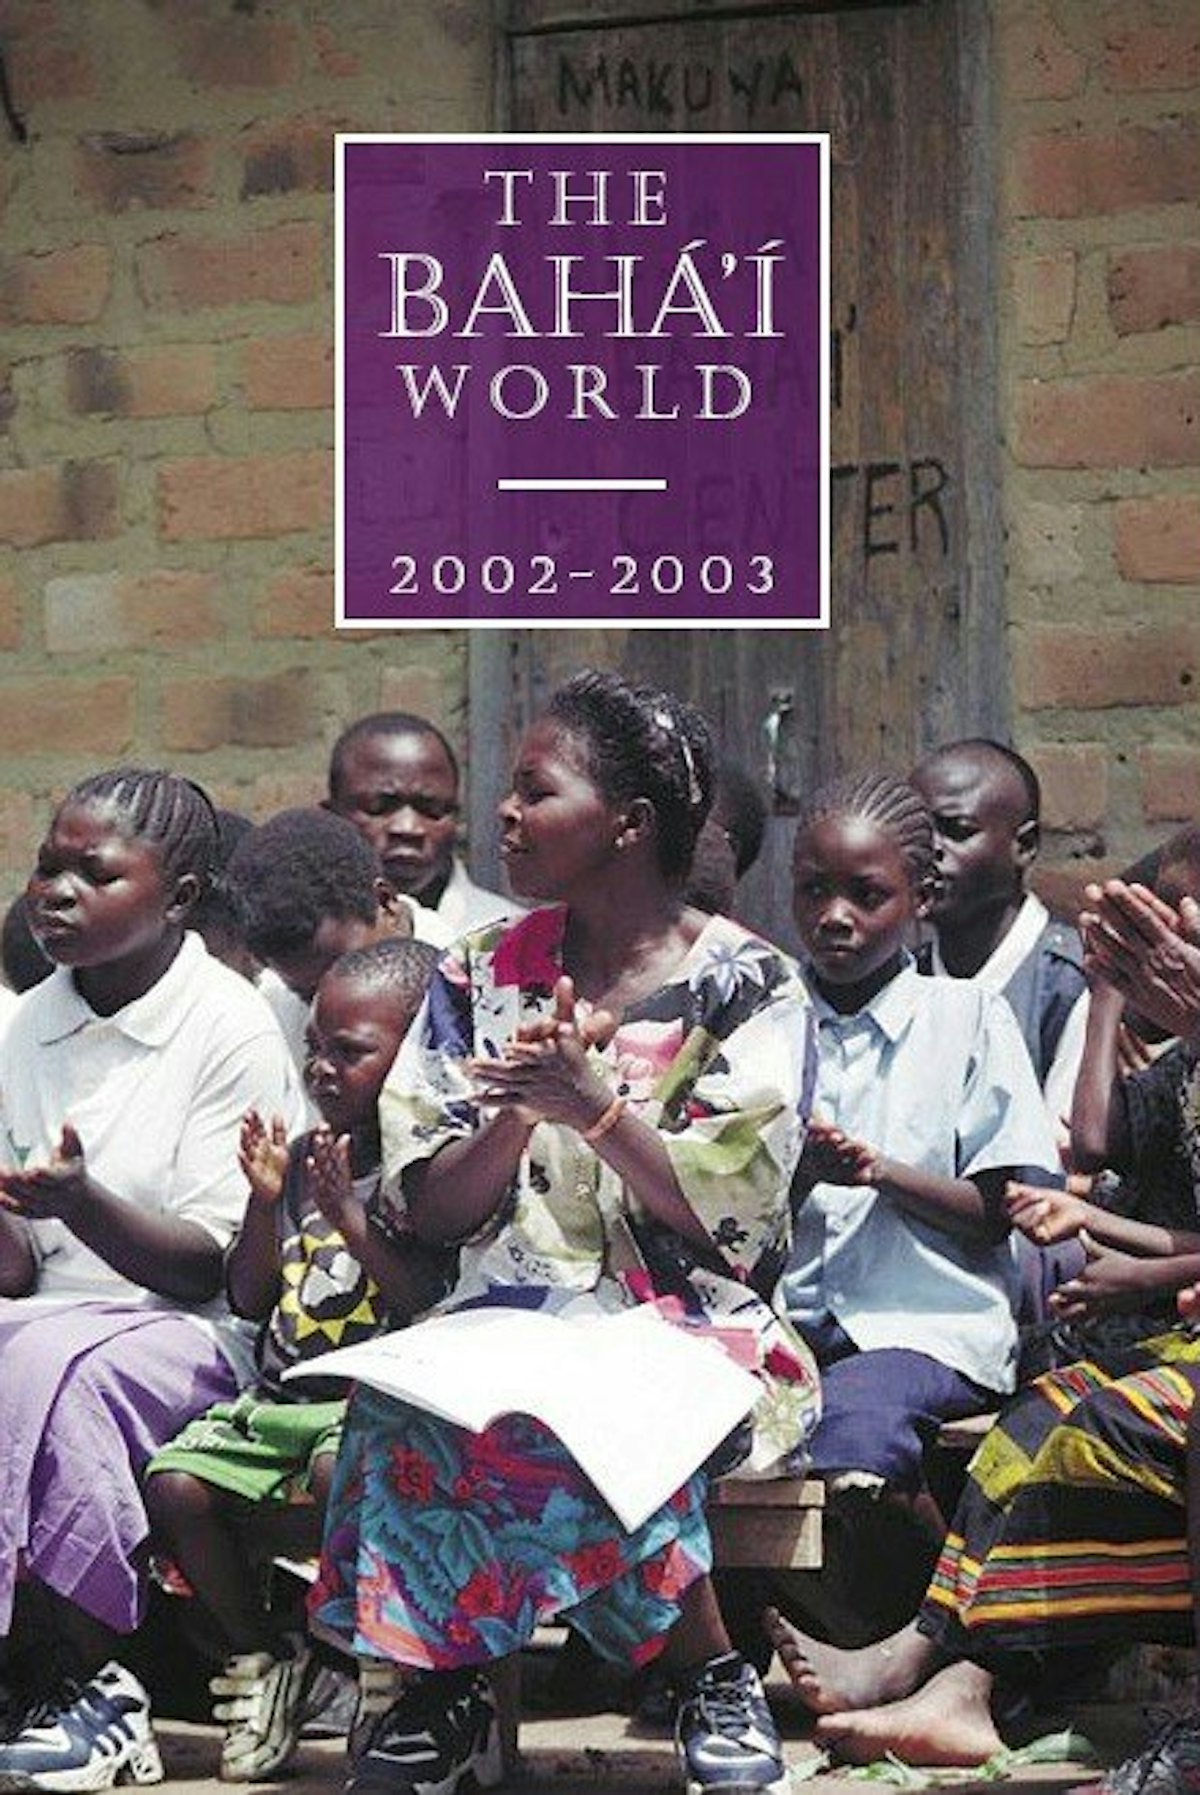 The cover of "The Baha'i World 2002-2003" features Baha'is in Ntambo, Zambia, singing at a devotional gathering.